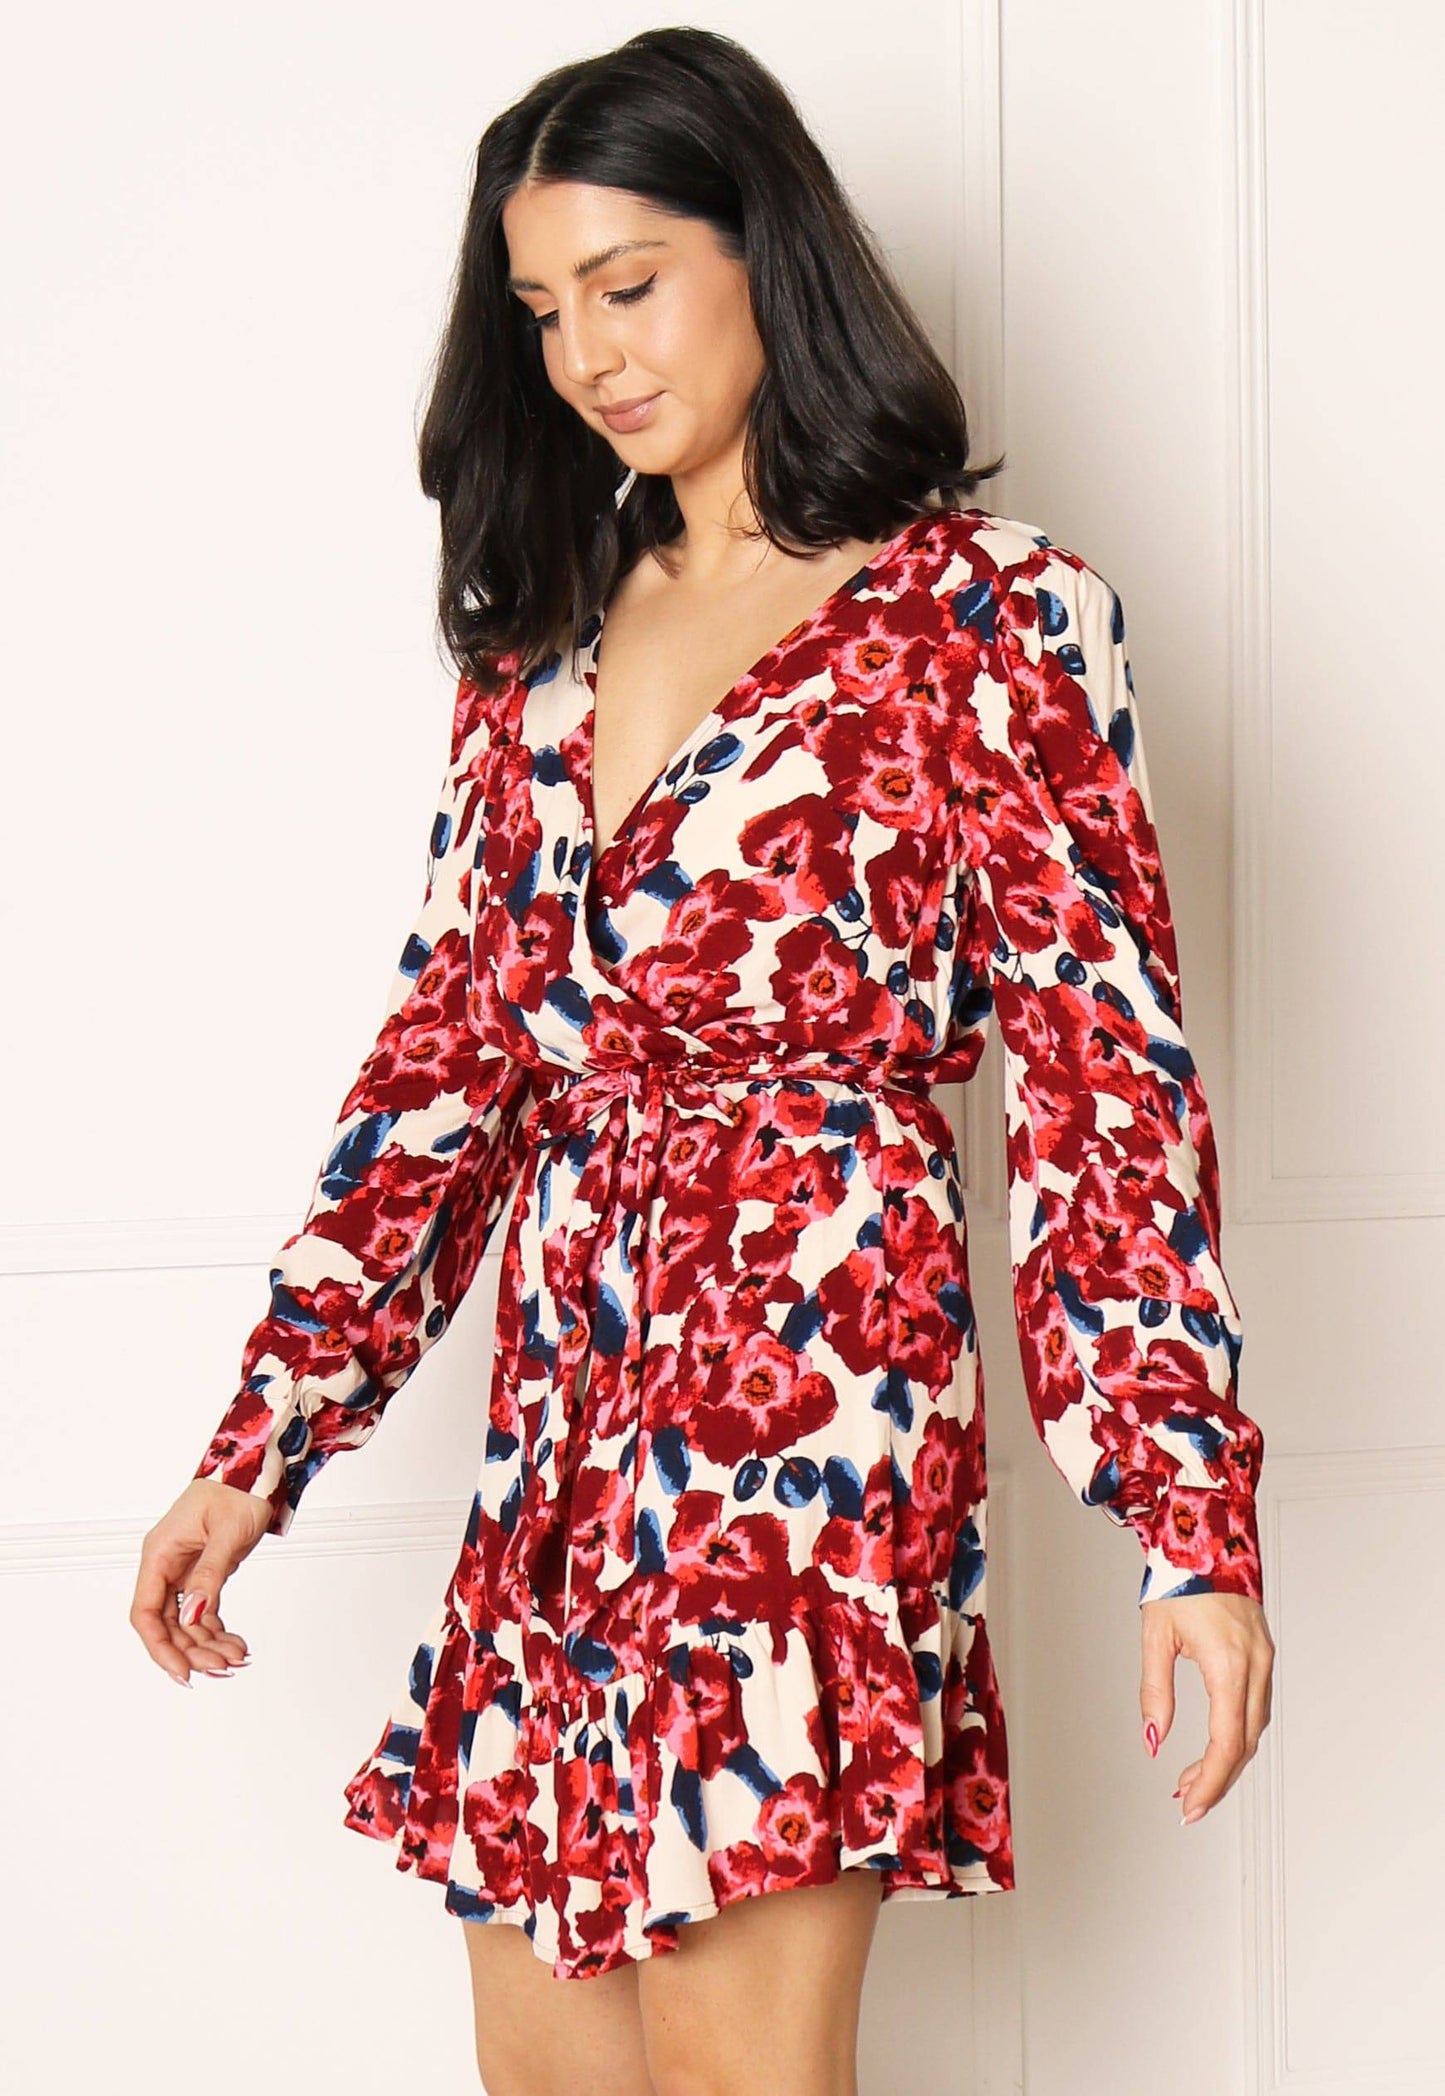 JDY True Floral Long Sleeve Mini Frill Wrap Dress in Red & Pink Tones - concretebartops